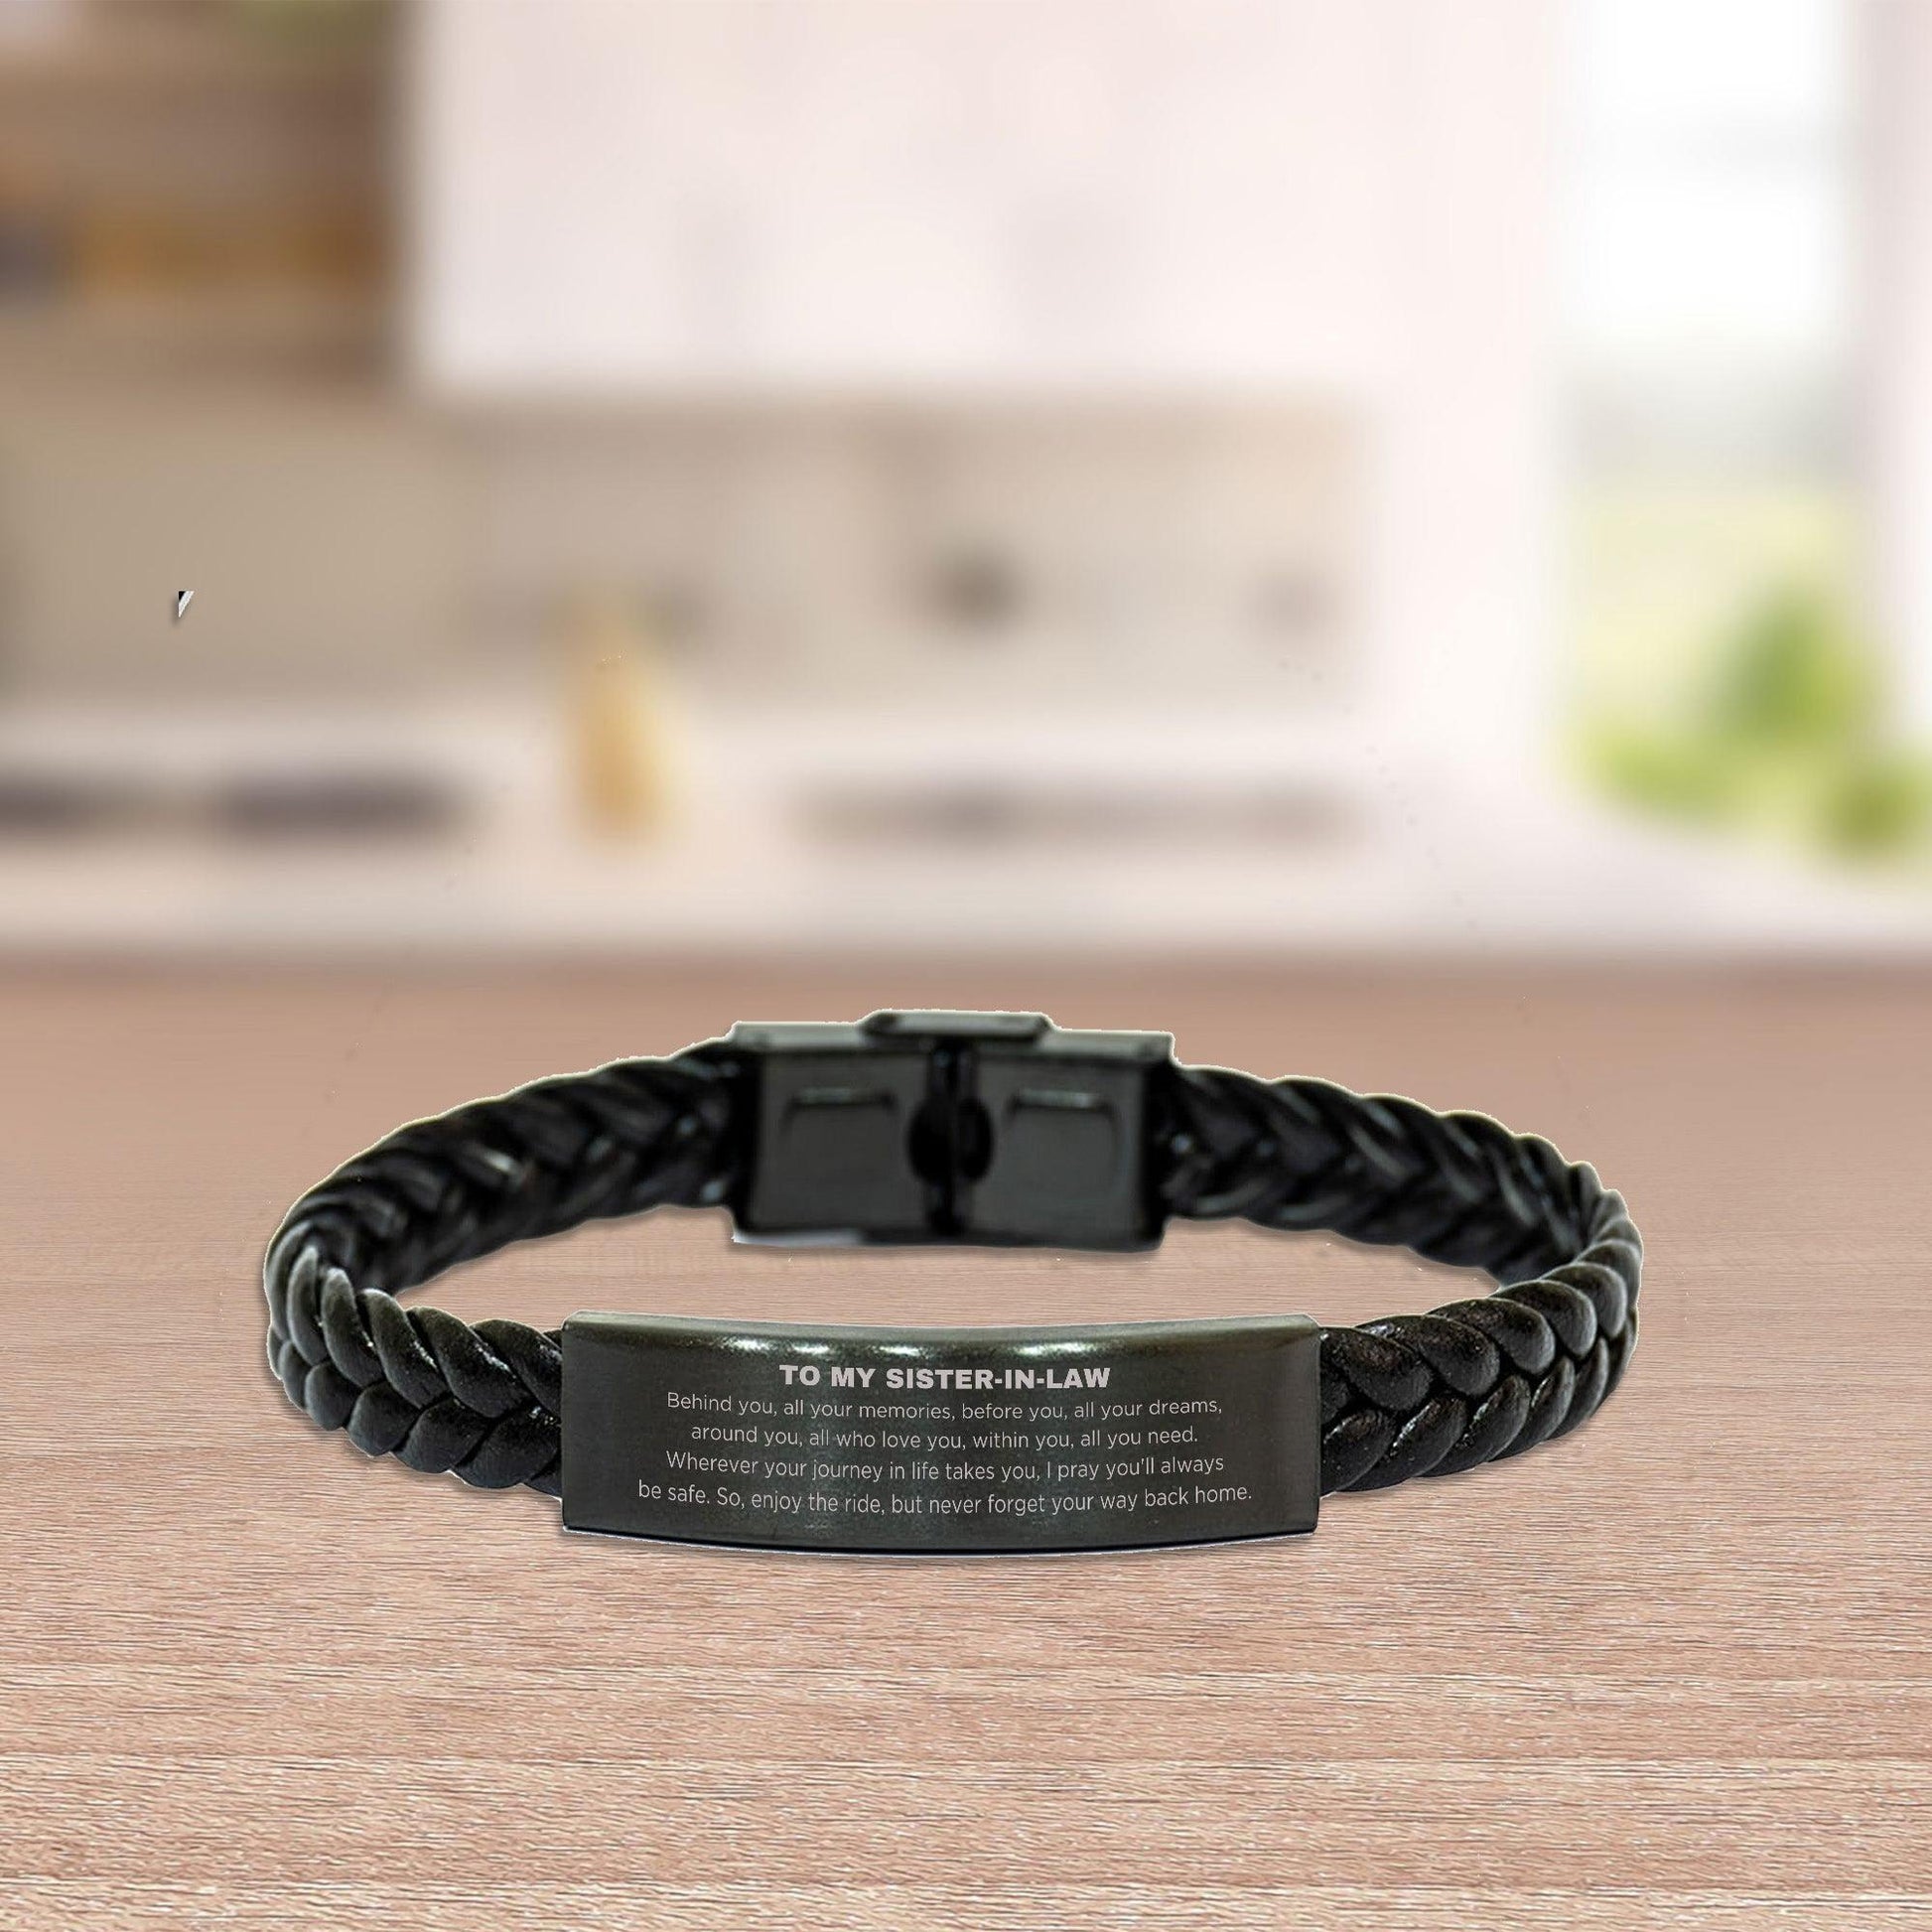 Inspirational Sister-In-Law Braided Leather Bracelet - Behind you, all your Memories, Before you, all your Dreams - Birthday, Christmas Holiday Gifts - Mallard Moon Gift Shop